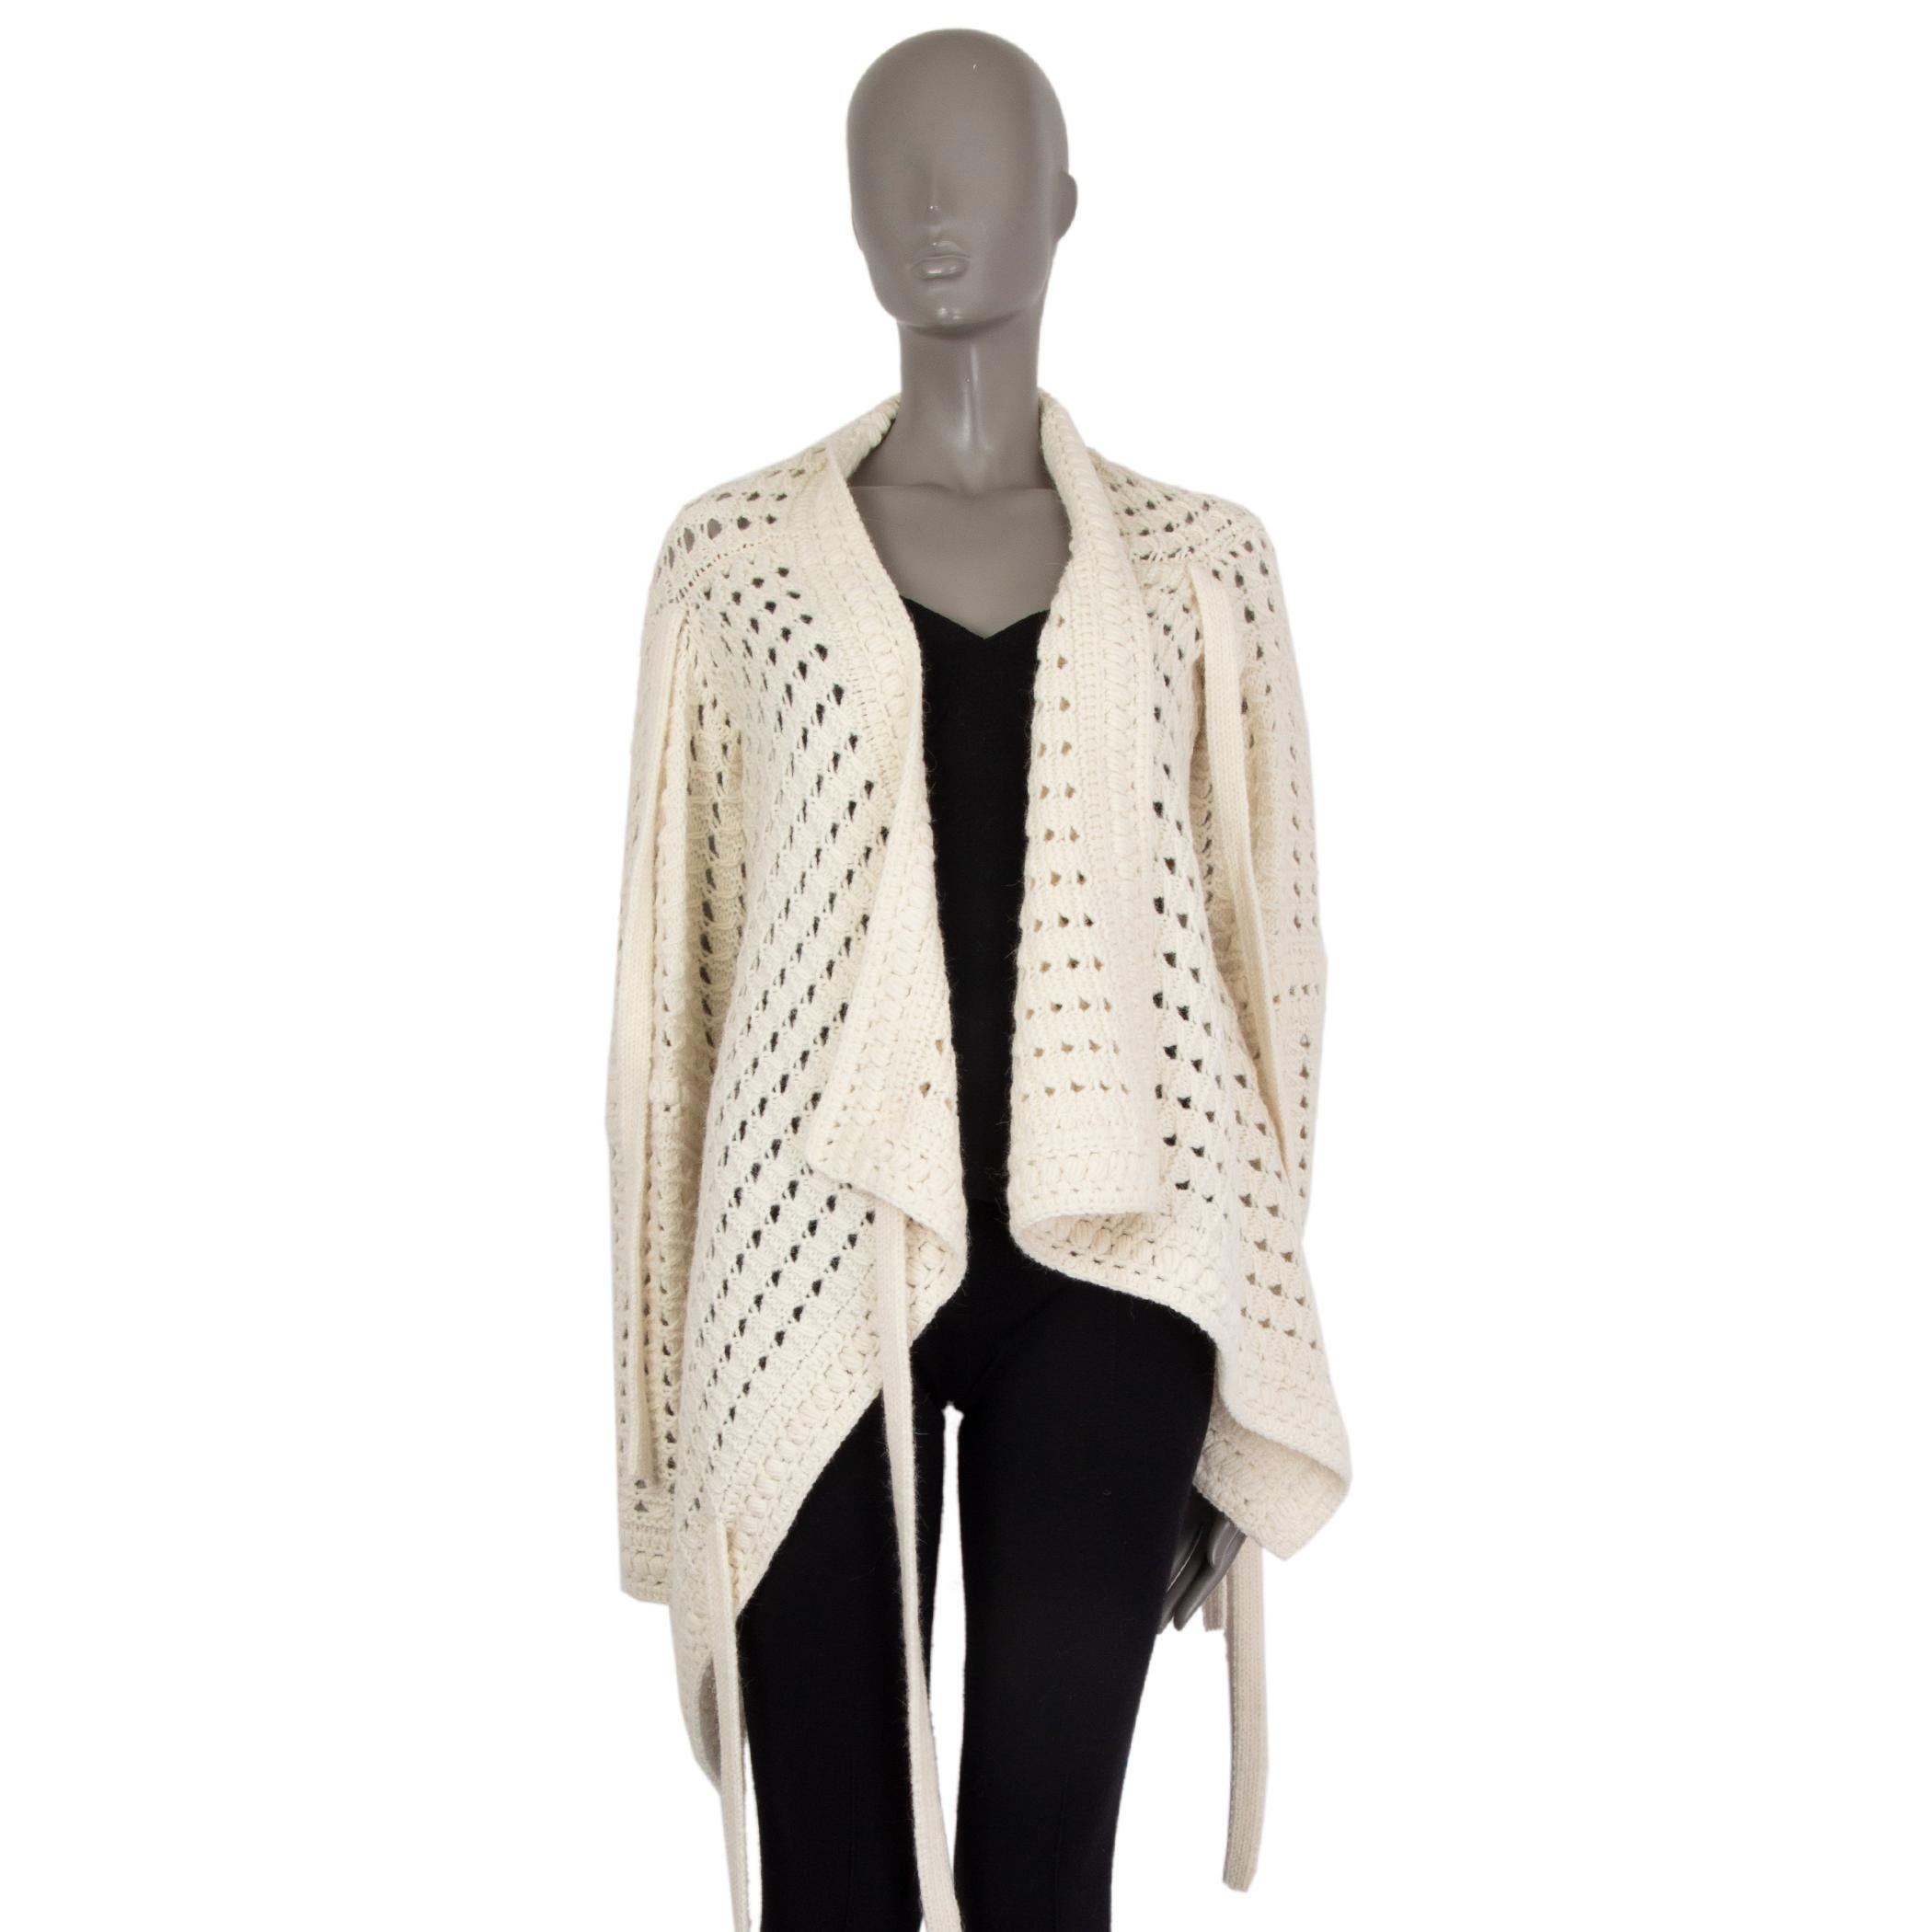 authentic Chloé asymmetric wrap-knit in cream acrylic (46%) alpaca (35%) wool (19%) with strings for multi-tie purpose, crochet knit, mid-heavy weight. Unlined. Has been worn and is in excellent condition.

Measurements
Tag